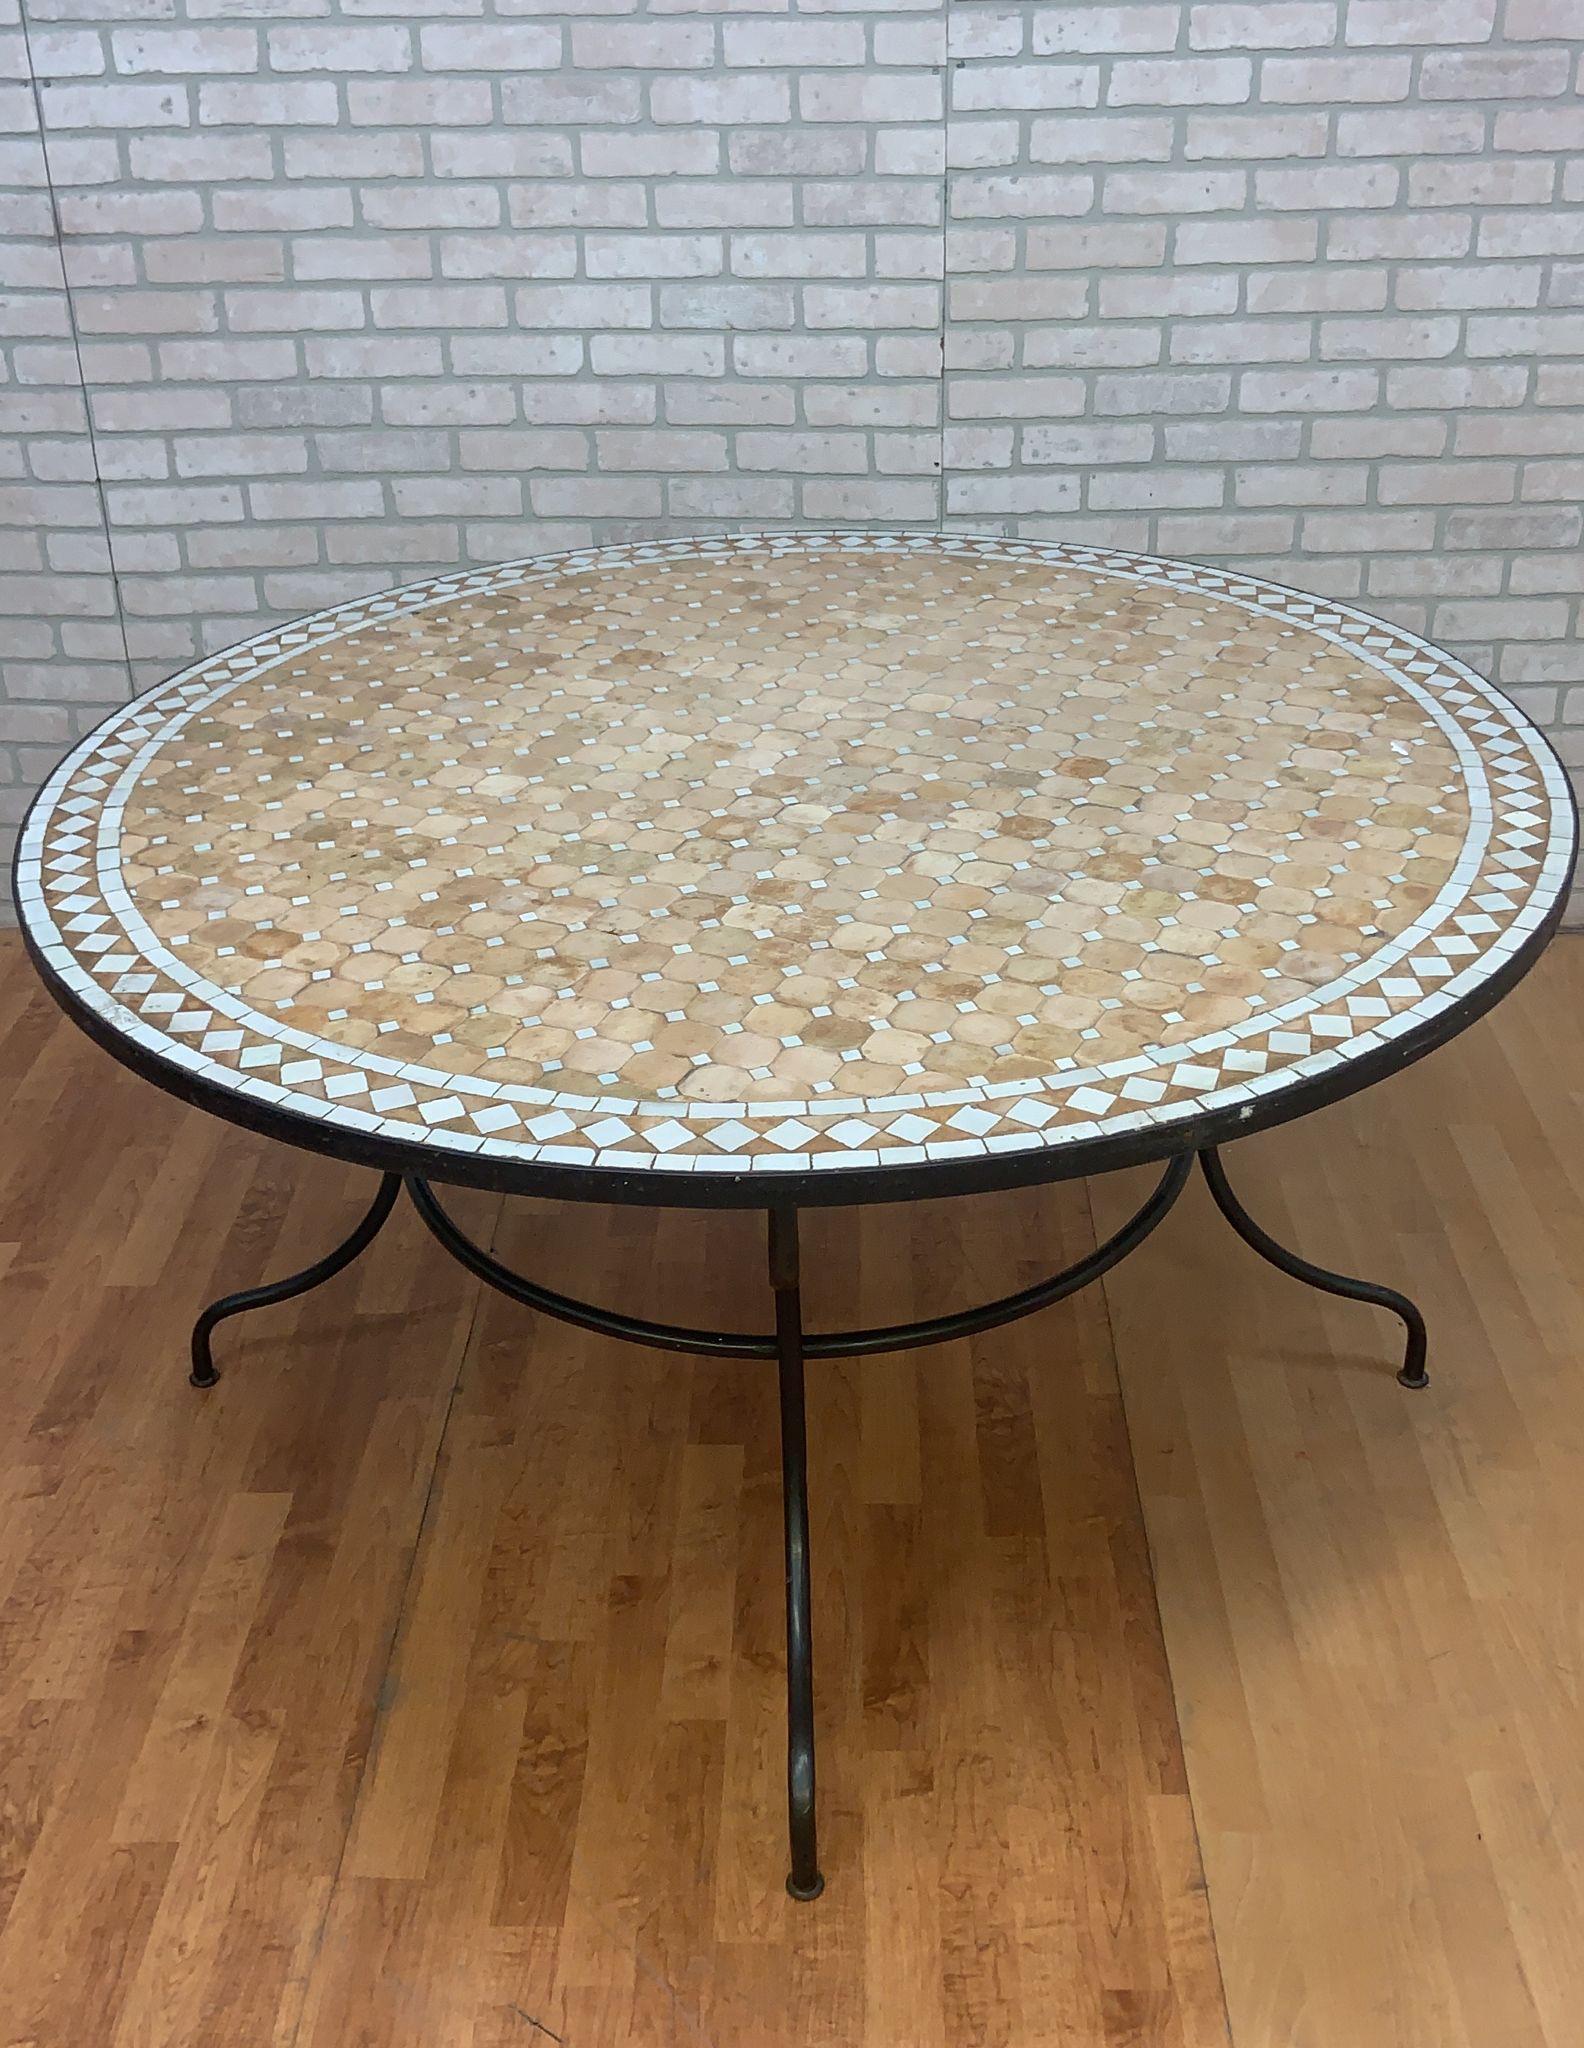 Hand-Crafted Vintage Moroccan Mosaic Tile Indoor/Outdoor Dining Table